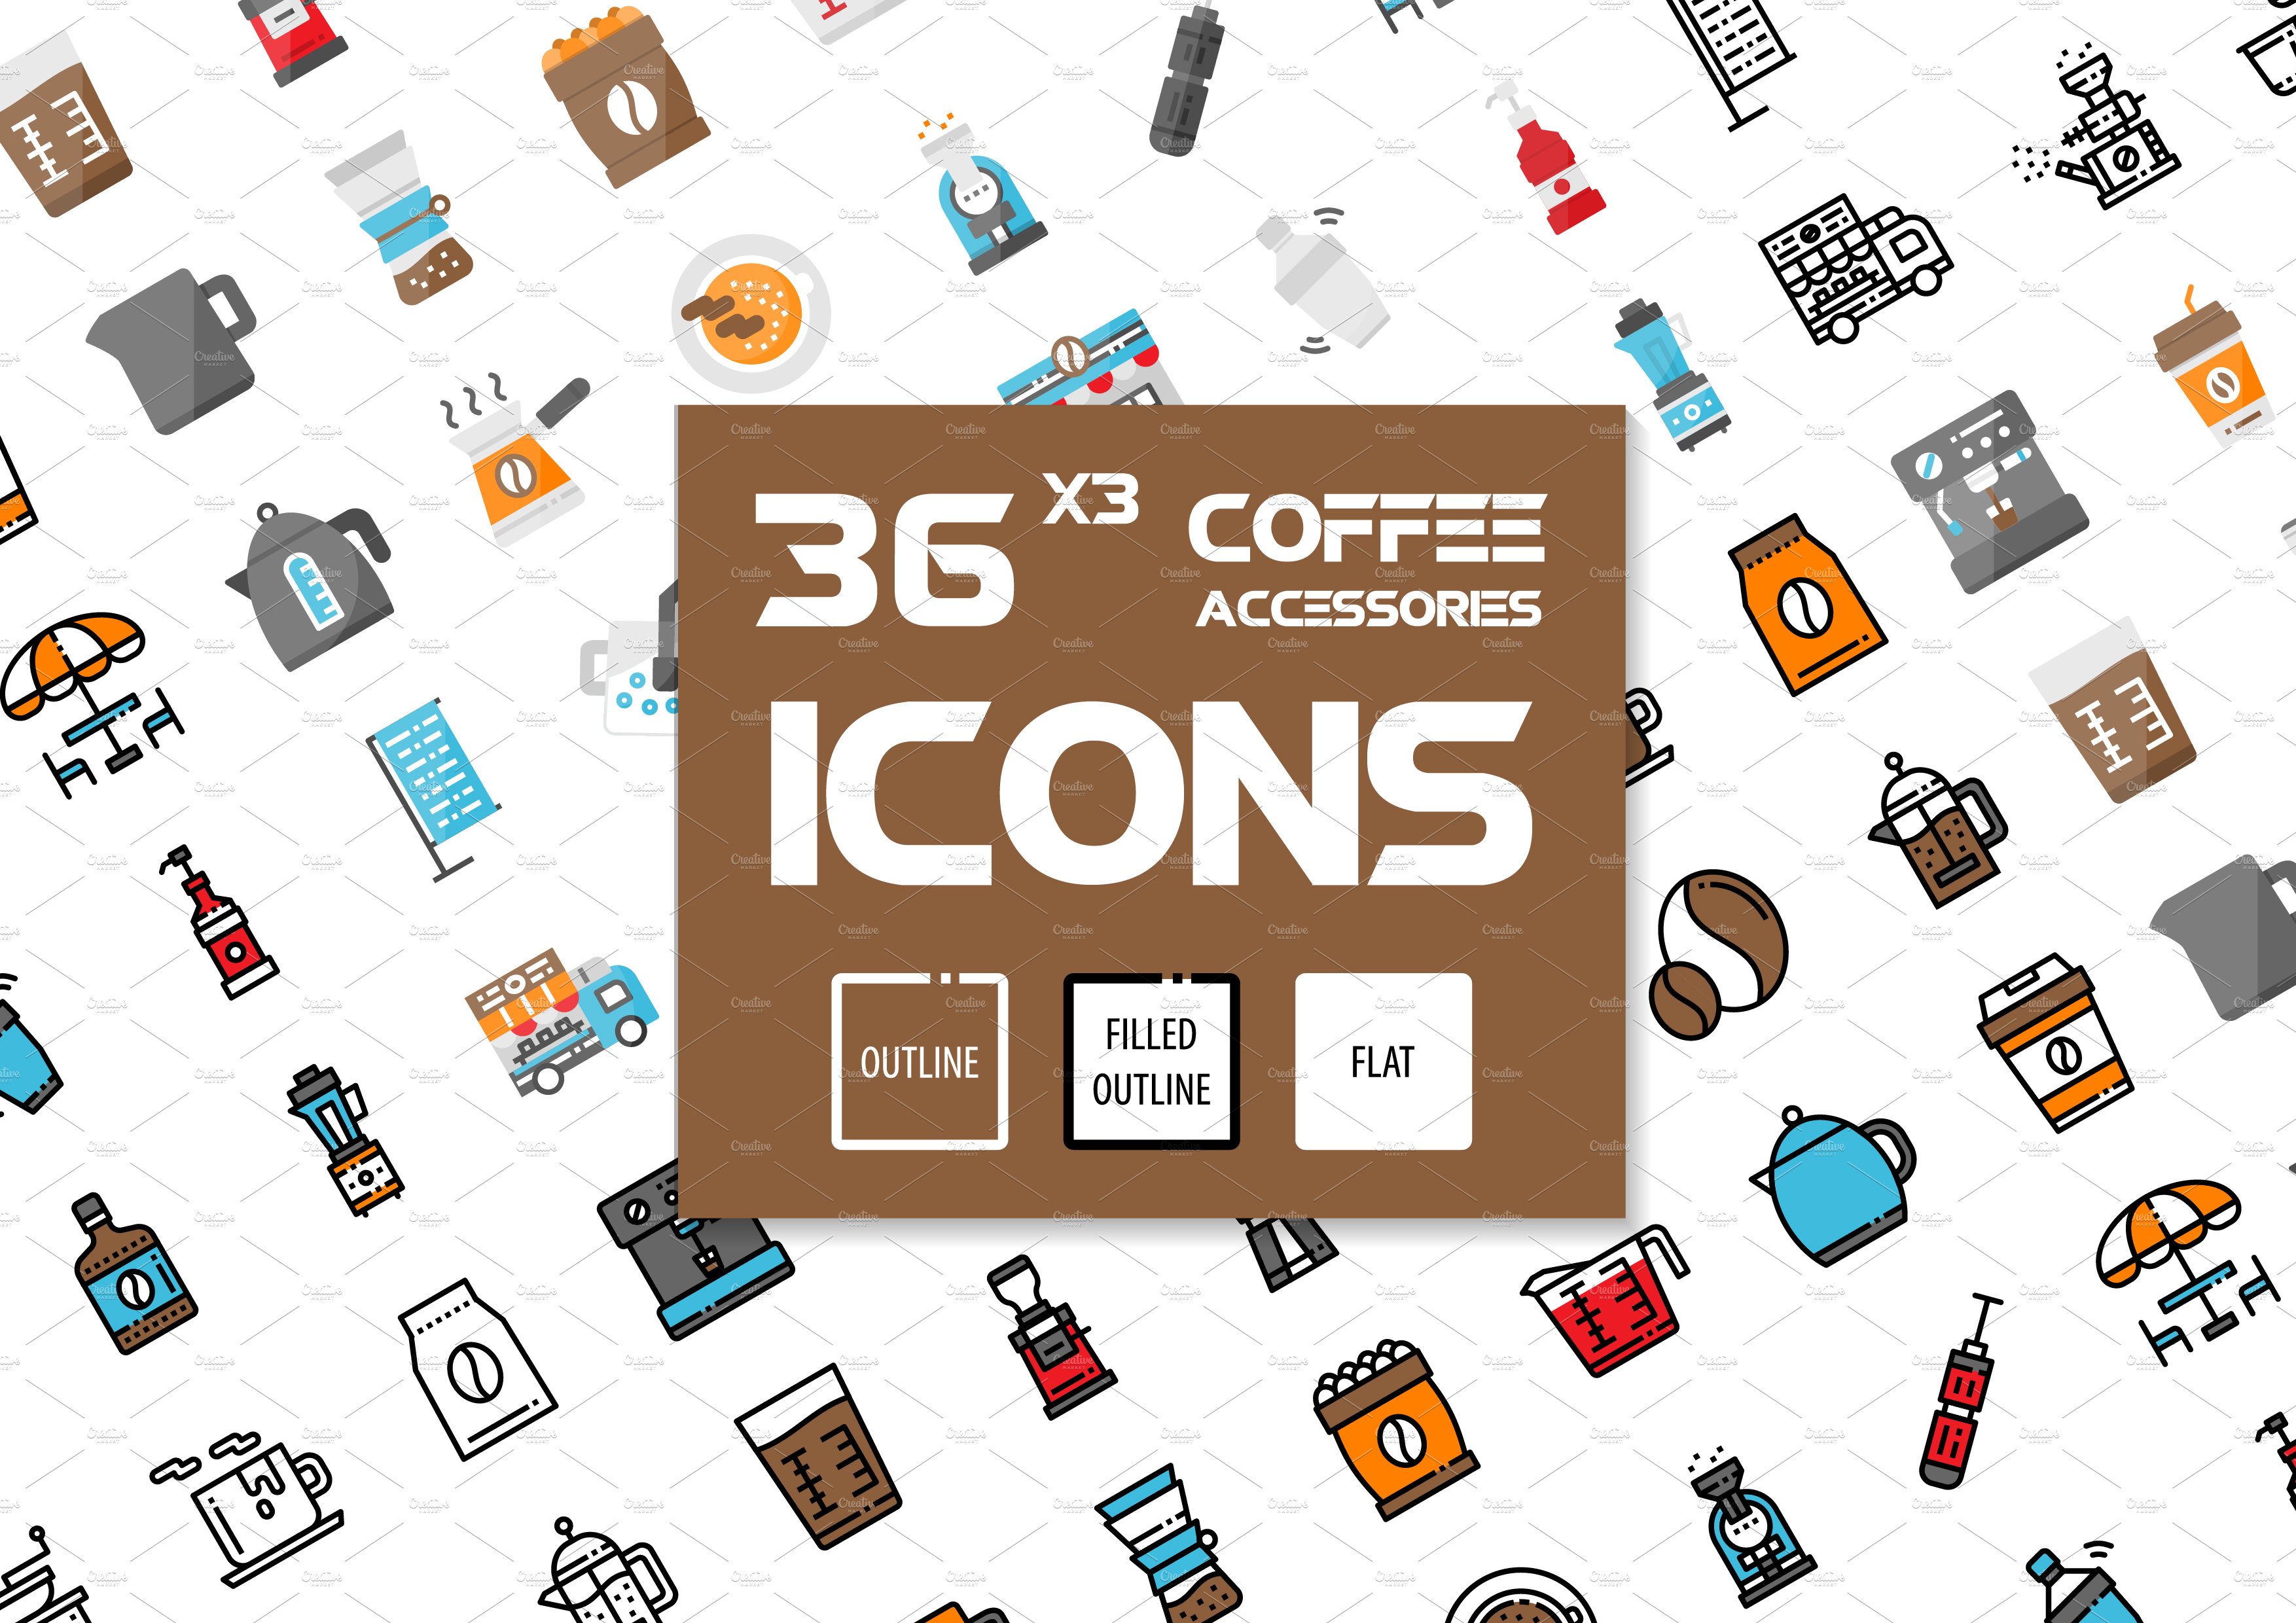 36x3 Coffee icons preview image.